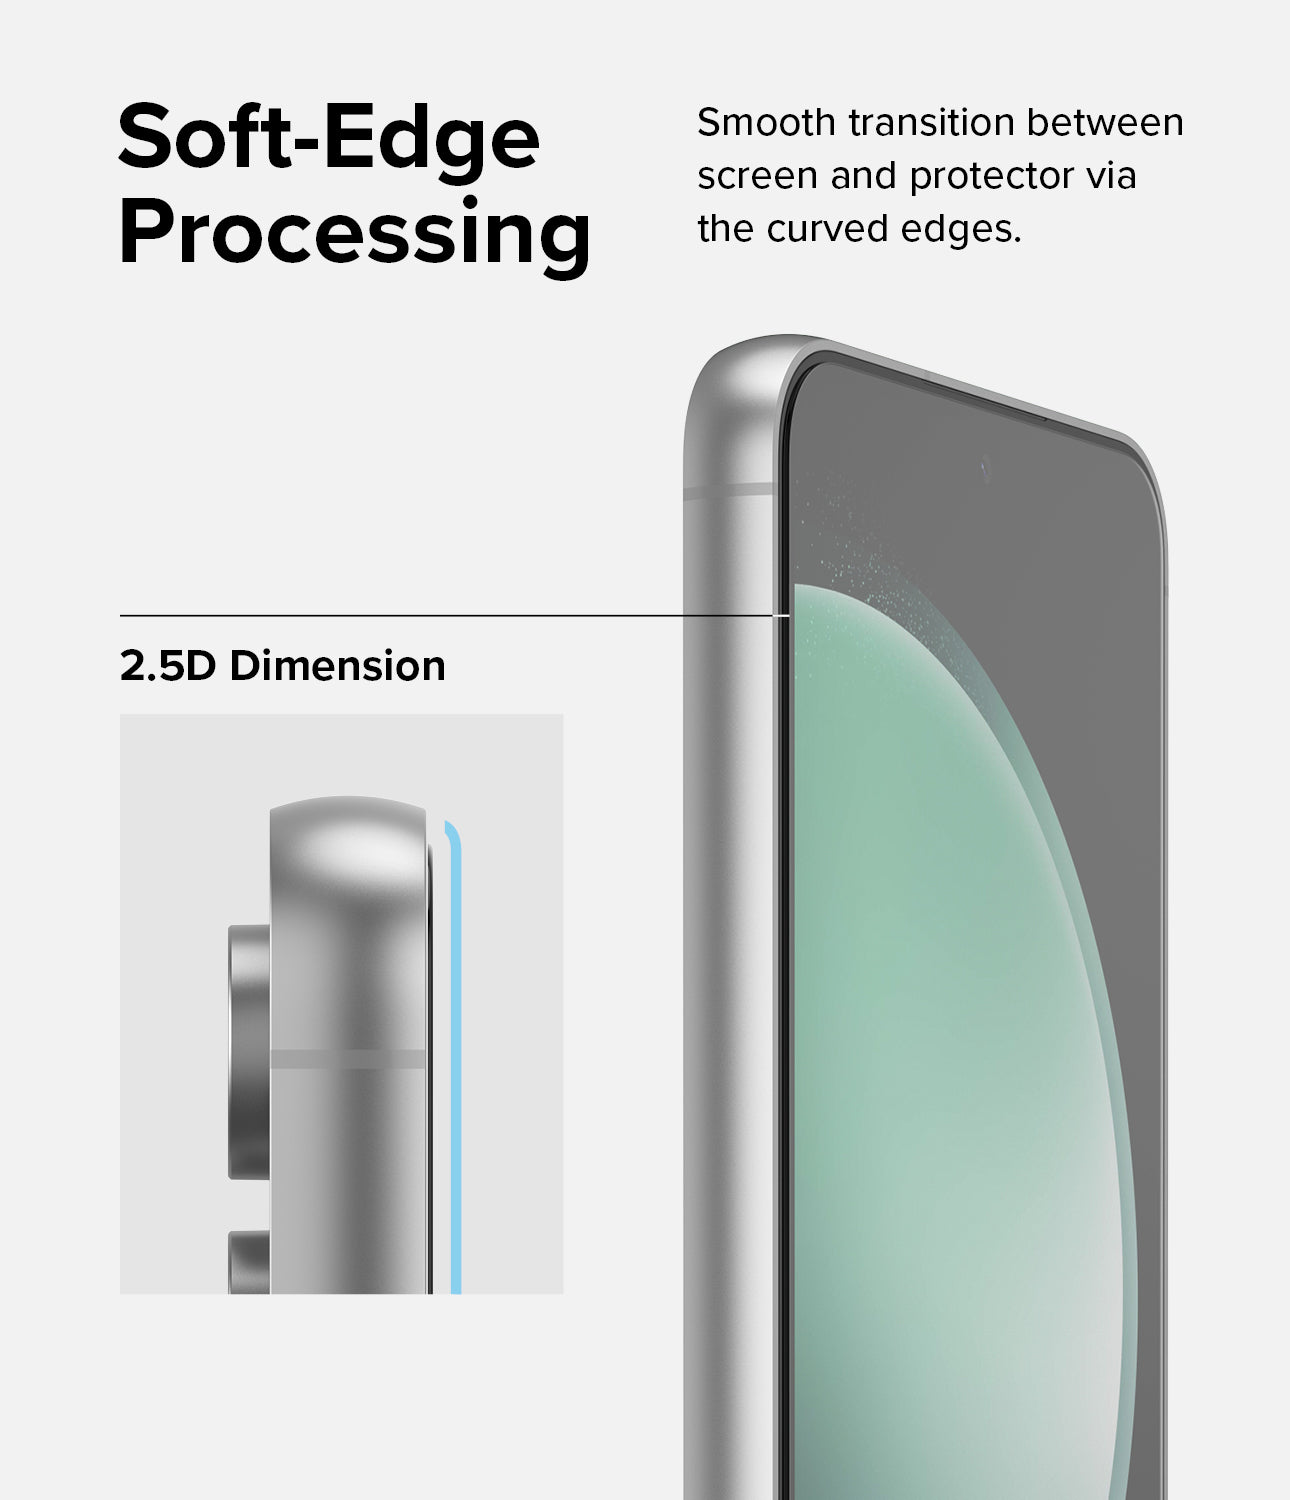 Galaxy S23 FE Screen Protector | Full Cover Glass - 2 Pack - Soft-Edge Processing. Smooth transition between screen and protector via the curved edges.